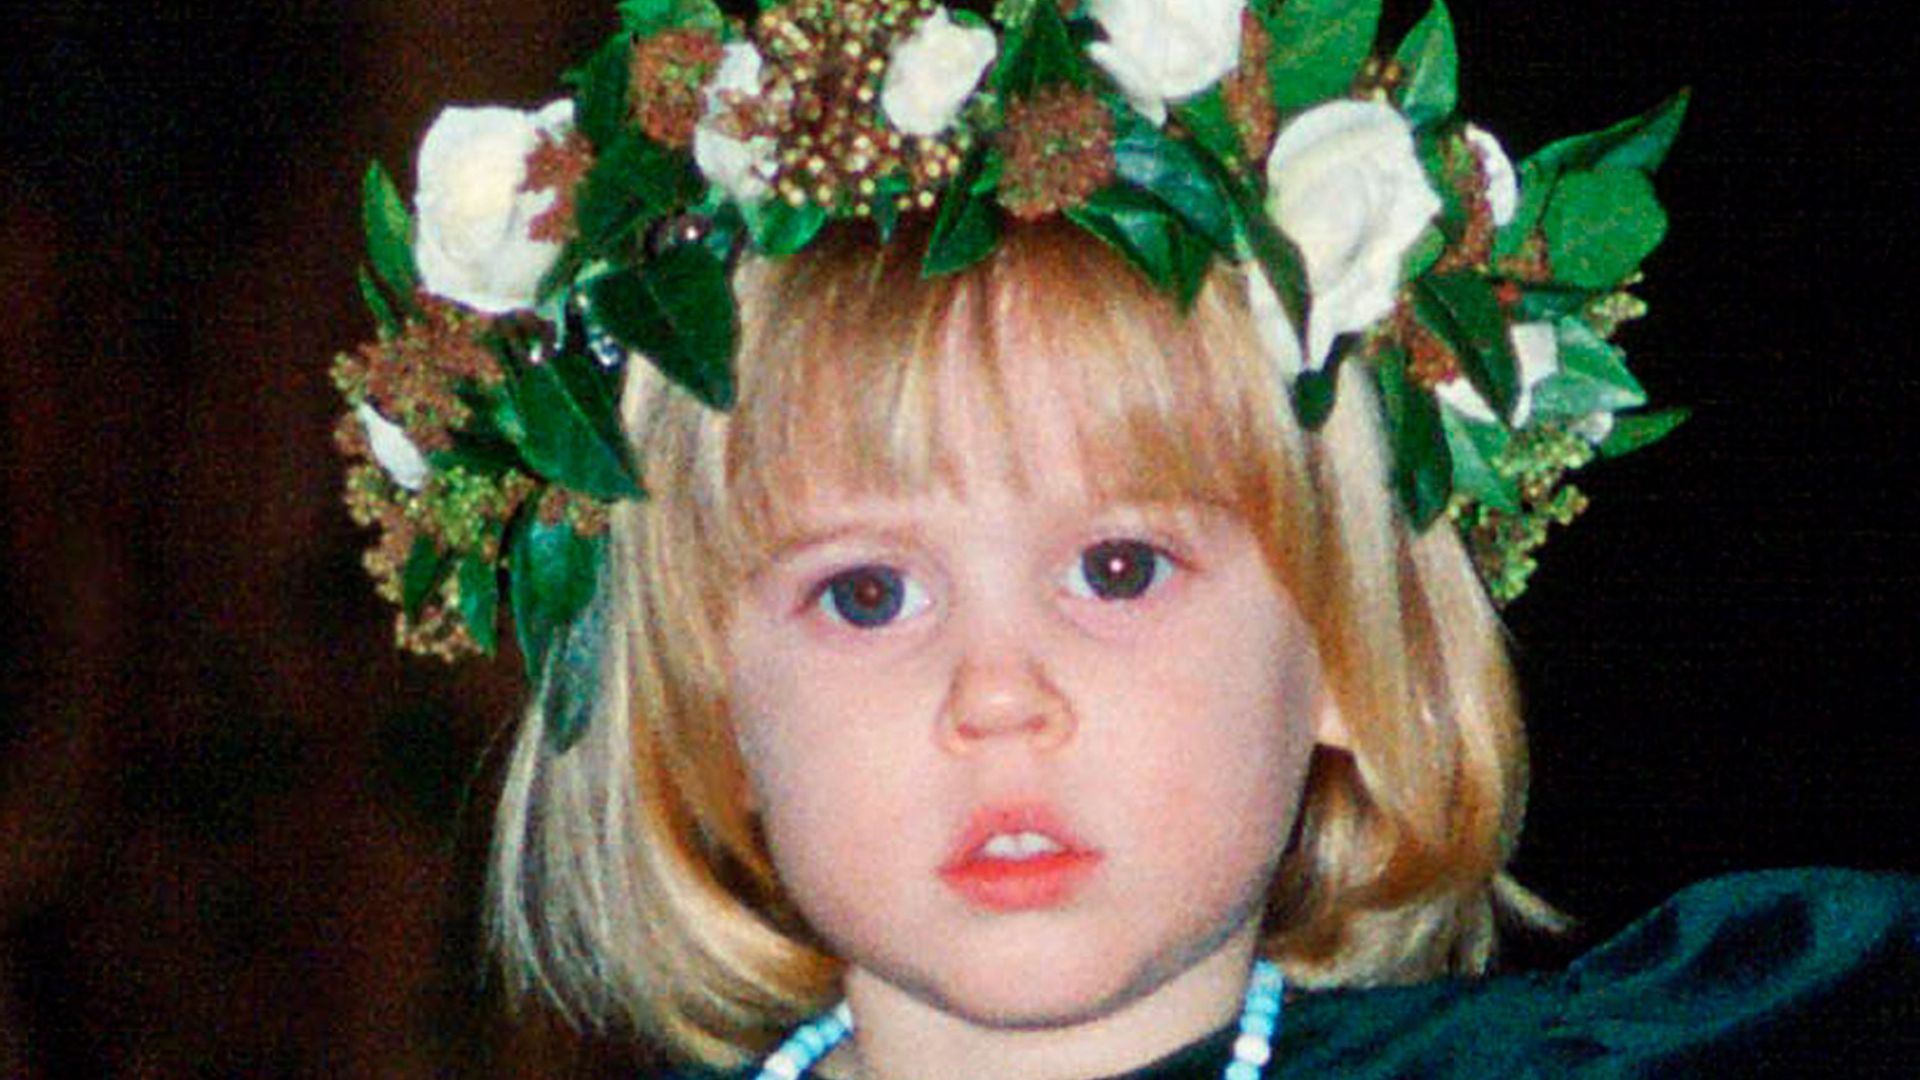 Princess Beatrice rebels with eye-catching accessories in angelic bridesmaid photo